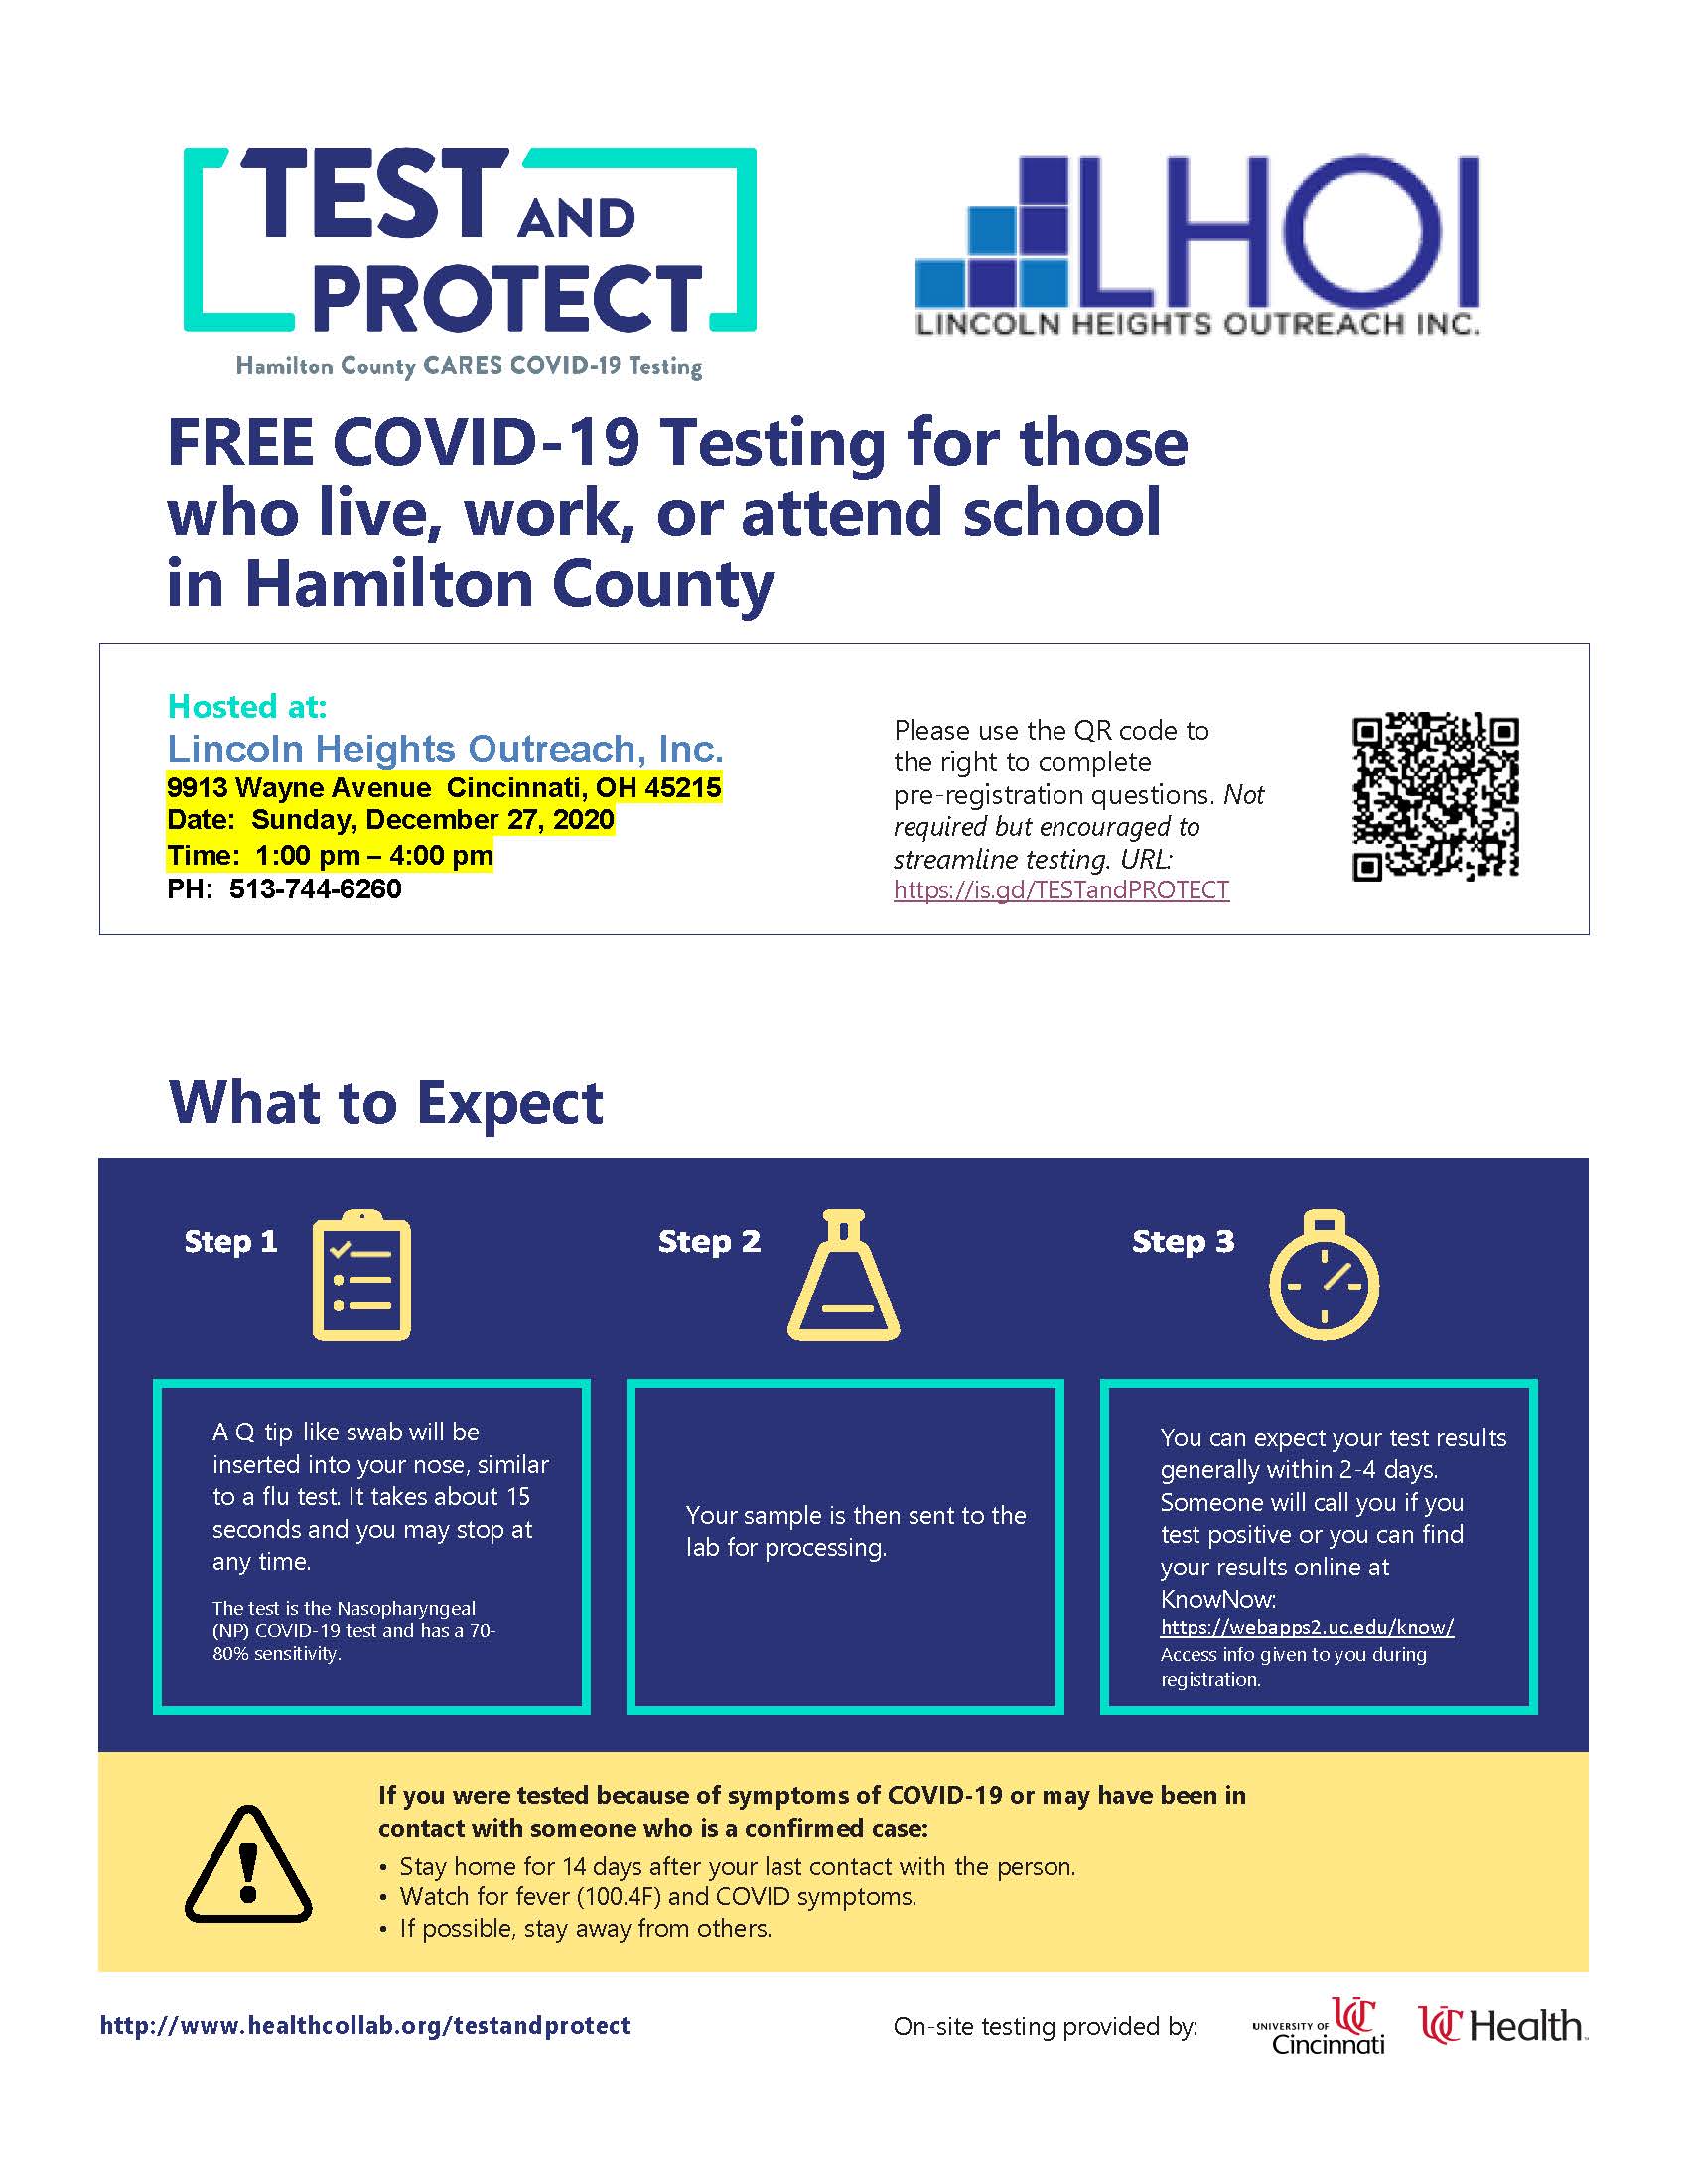 Test-and-Protect-flyer - LHOI